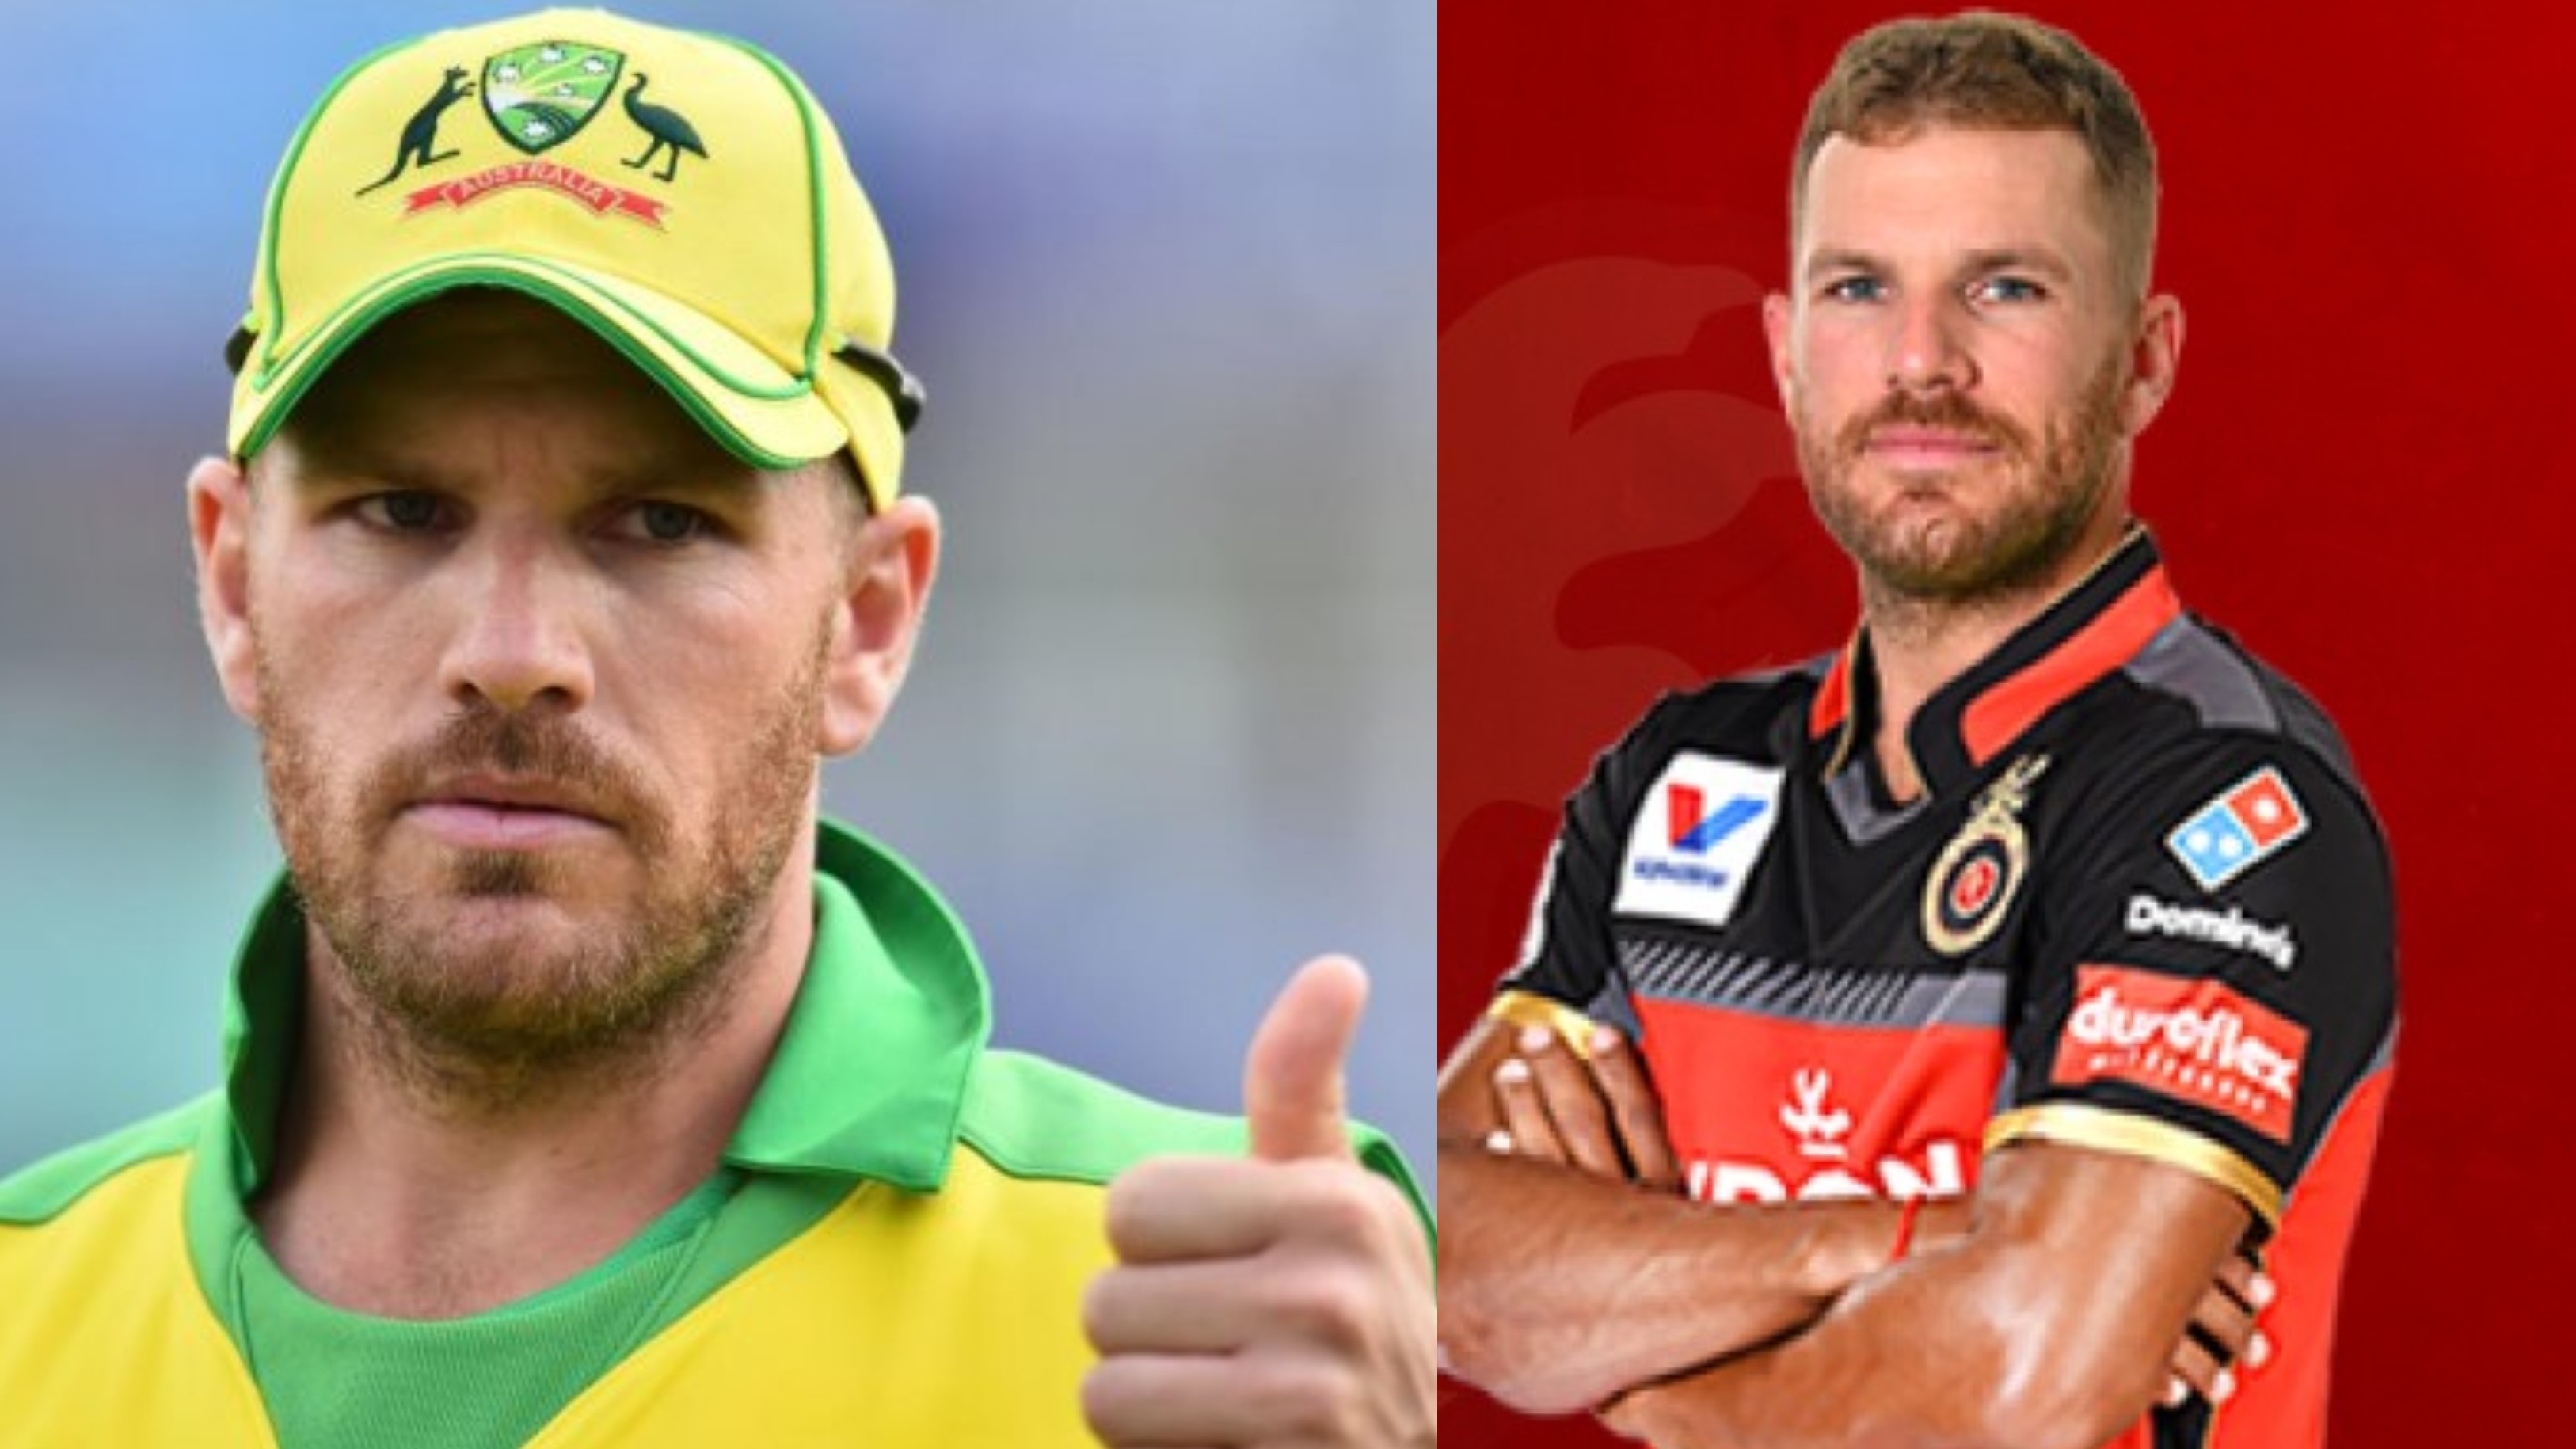 Ready to play in IPL 2020 given Cricket Australia grants NOC, says Aaron Finch